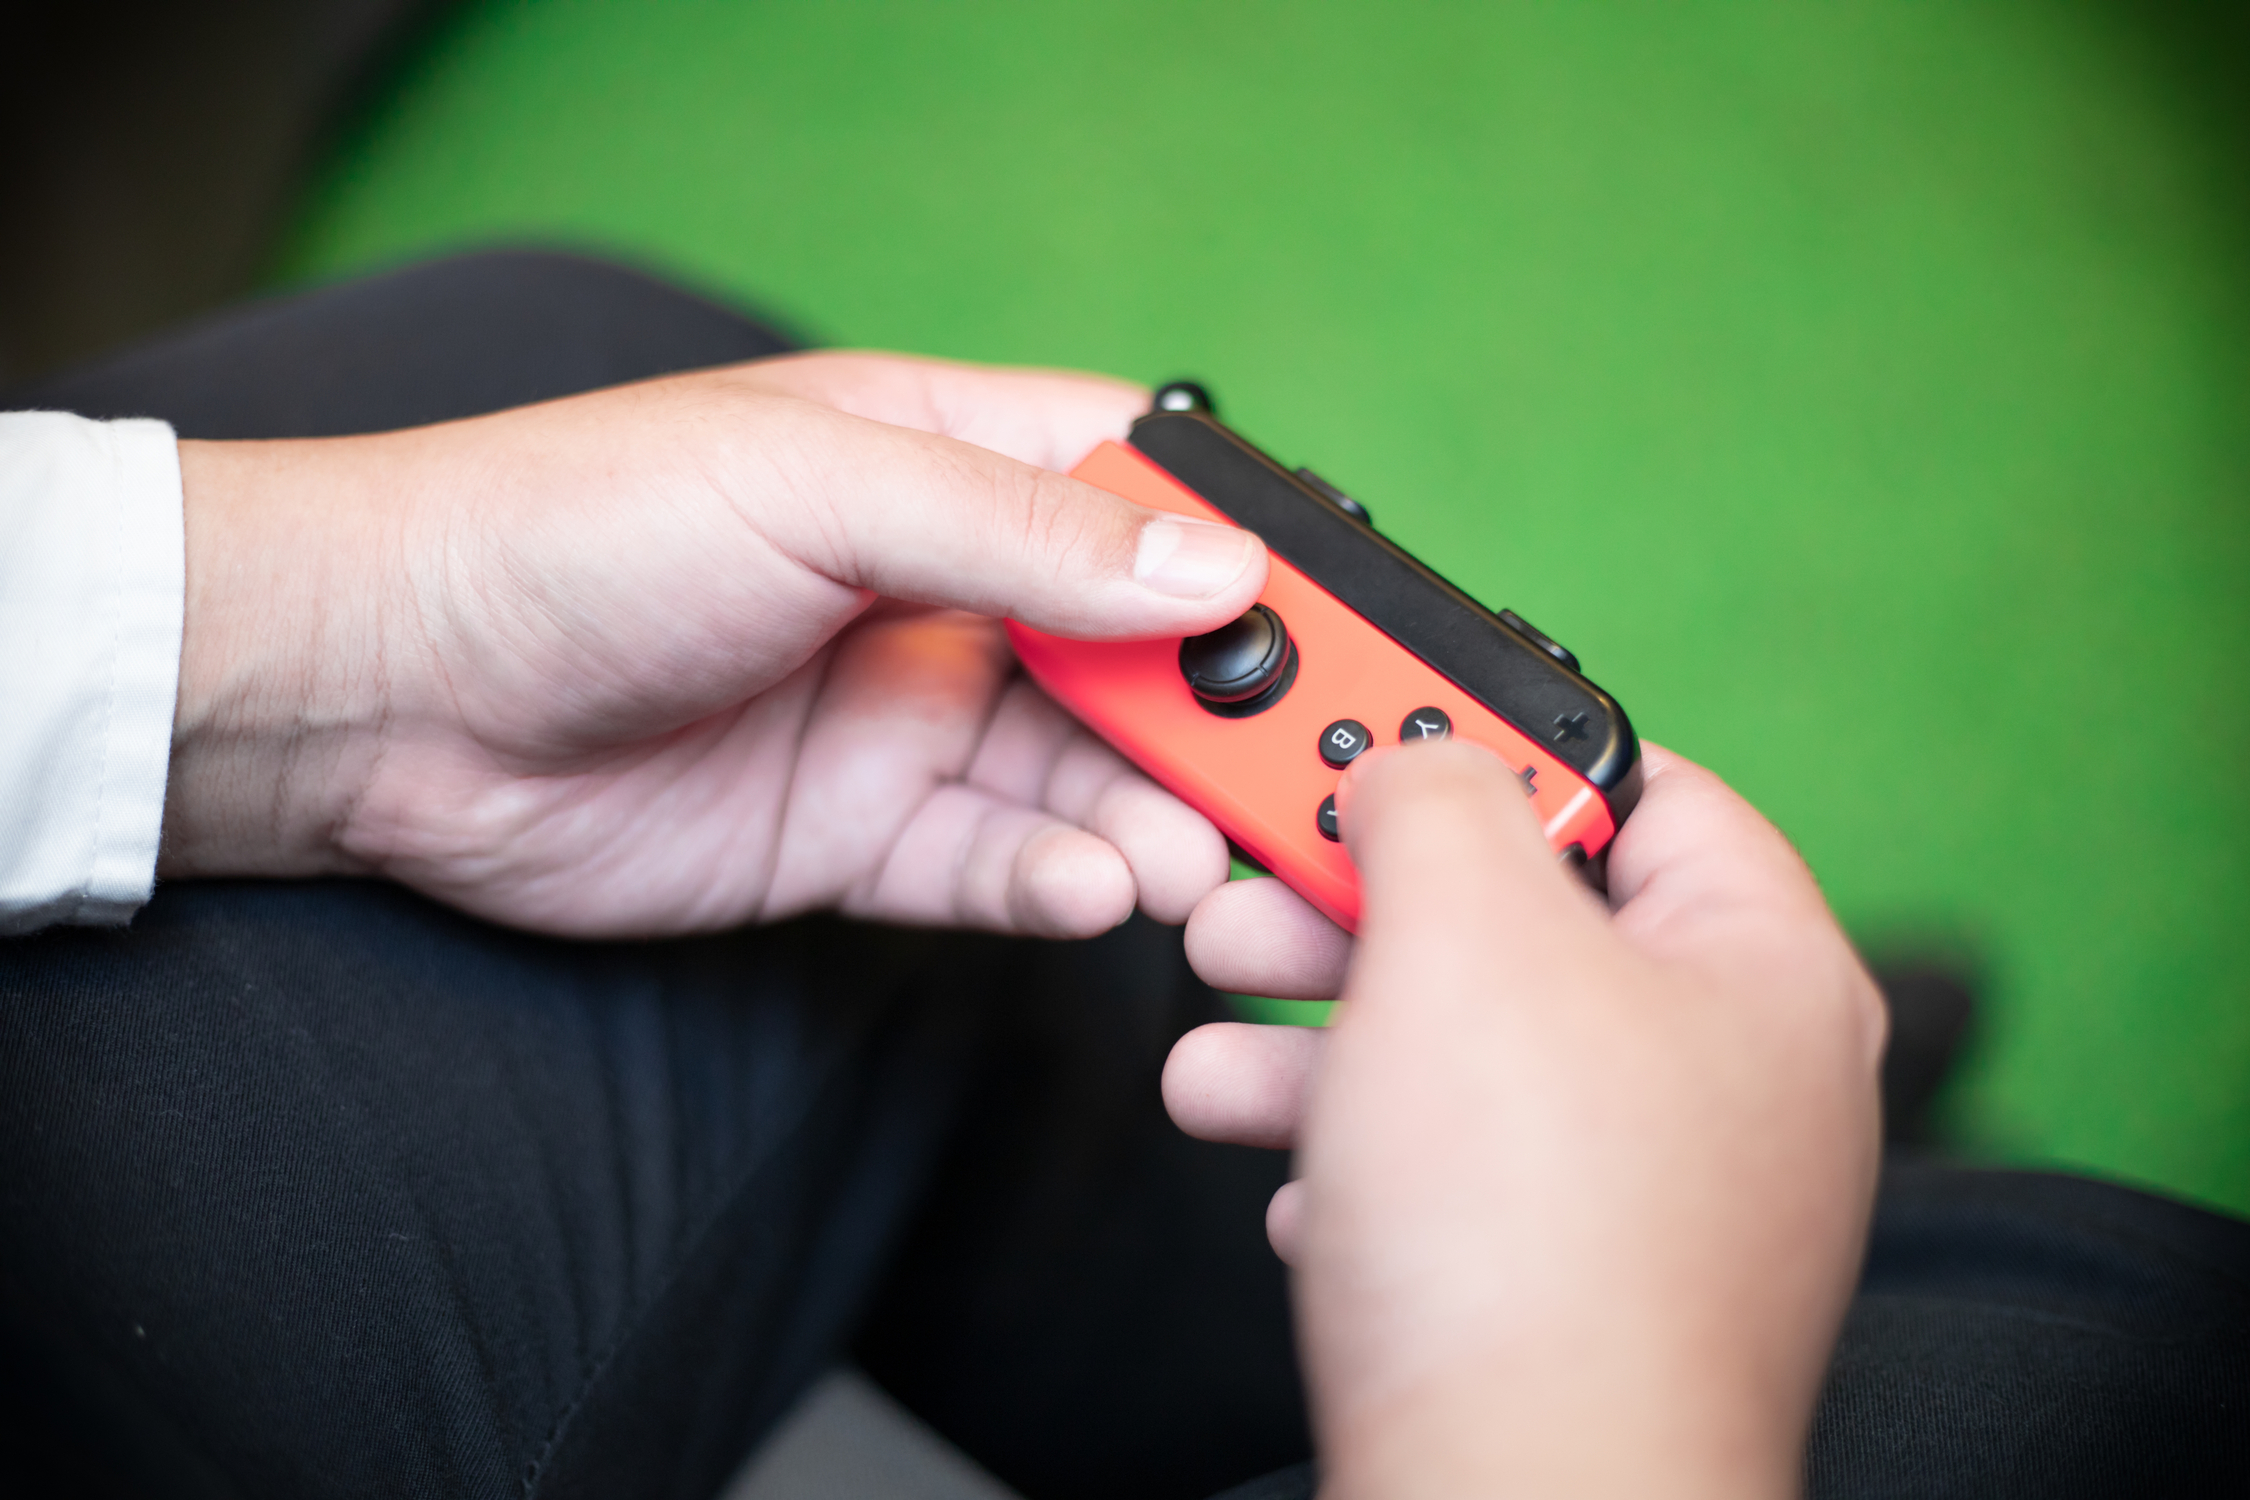 The Nintendo Switch Joy-Con showed us we deserve more from